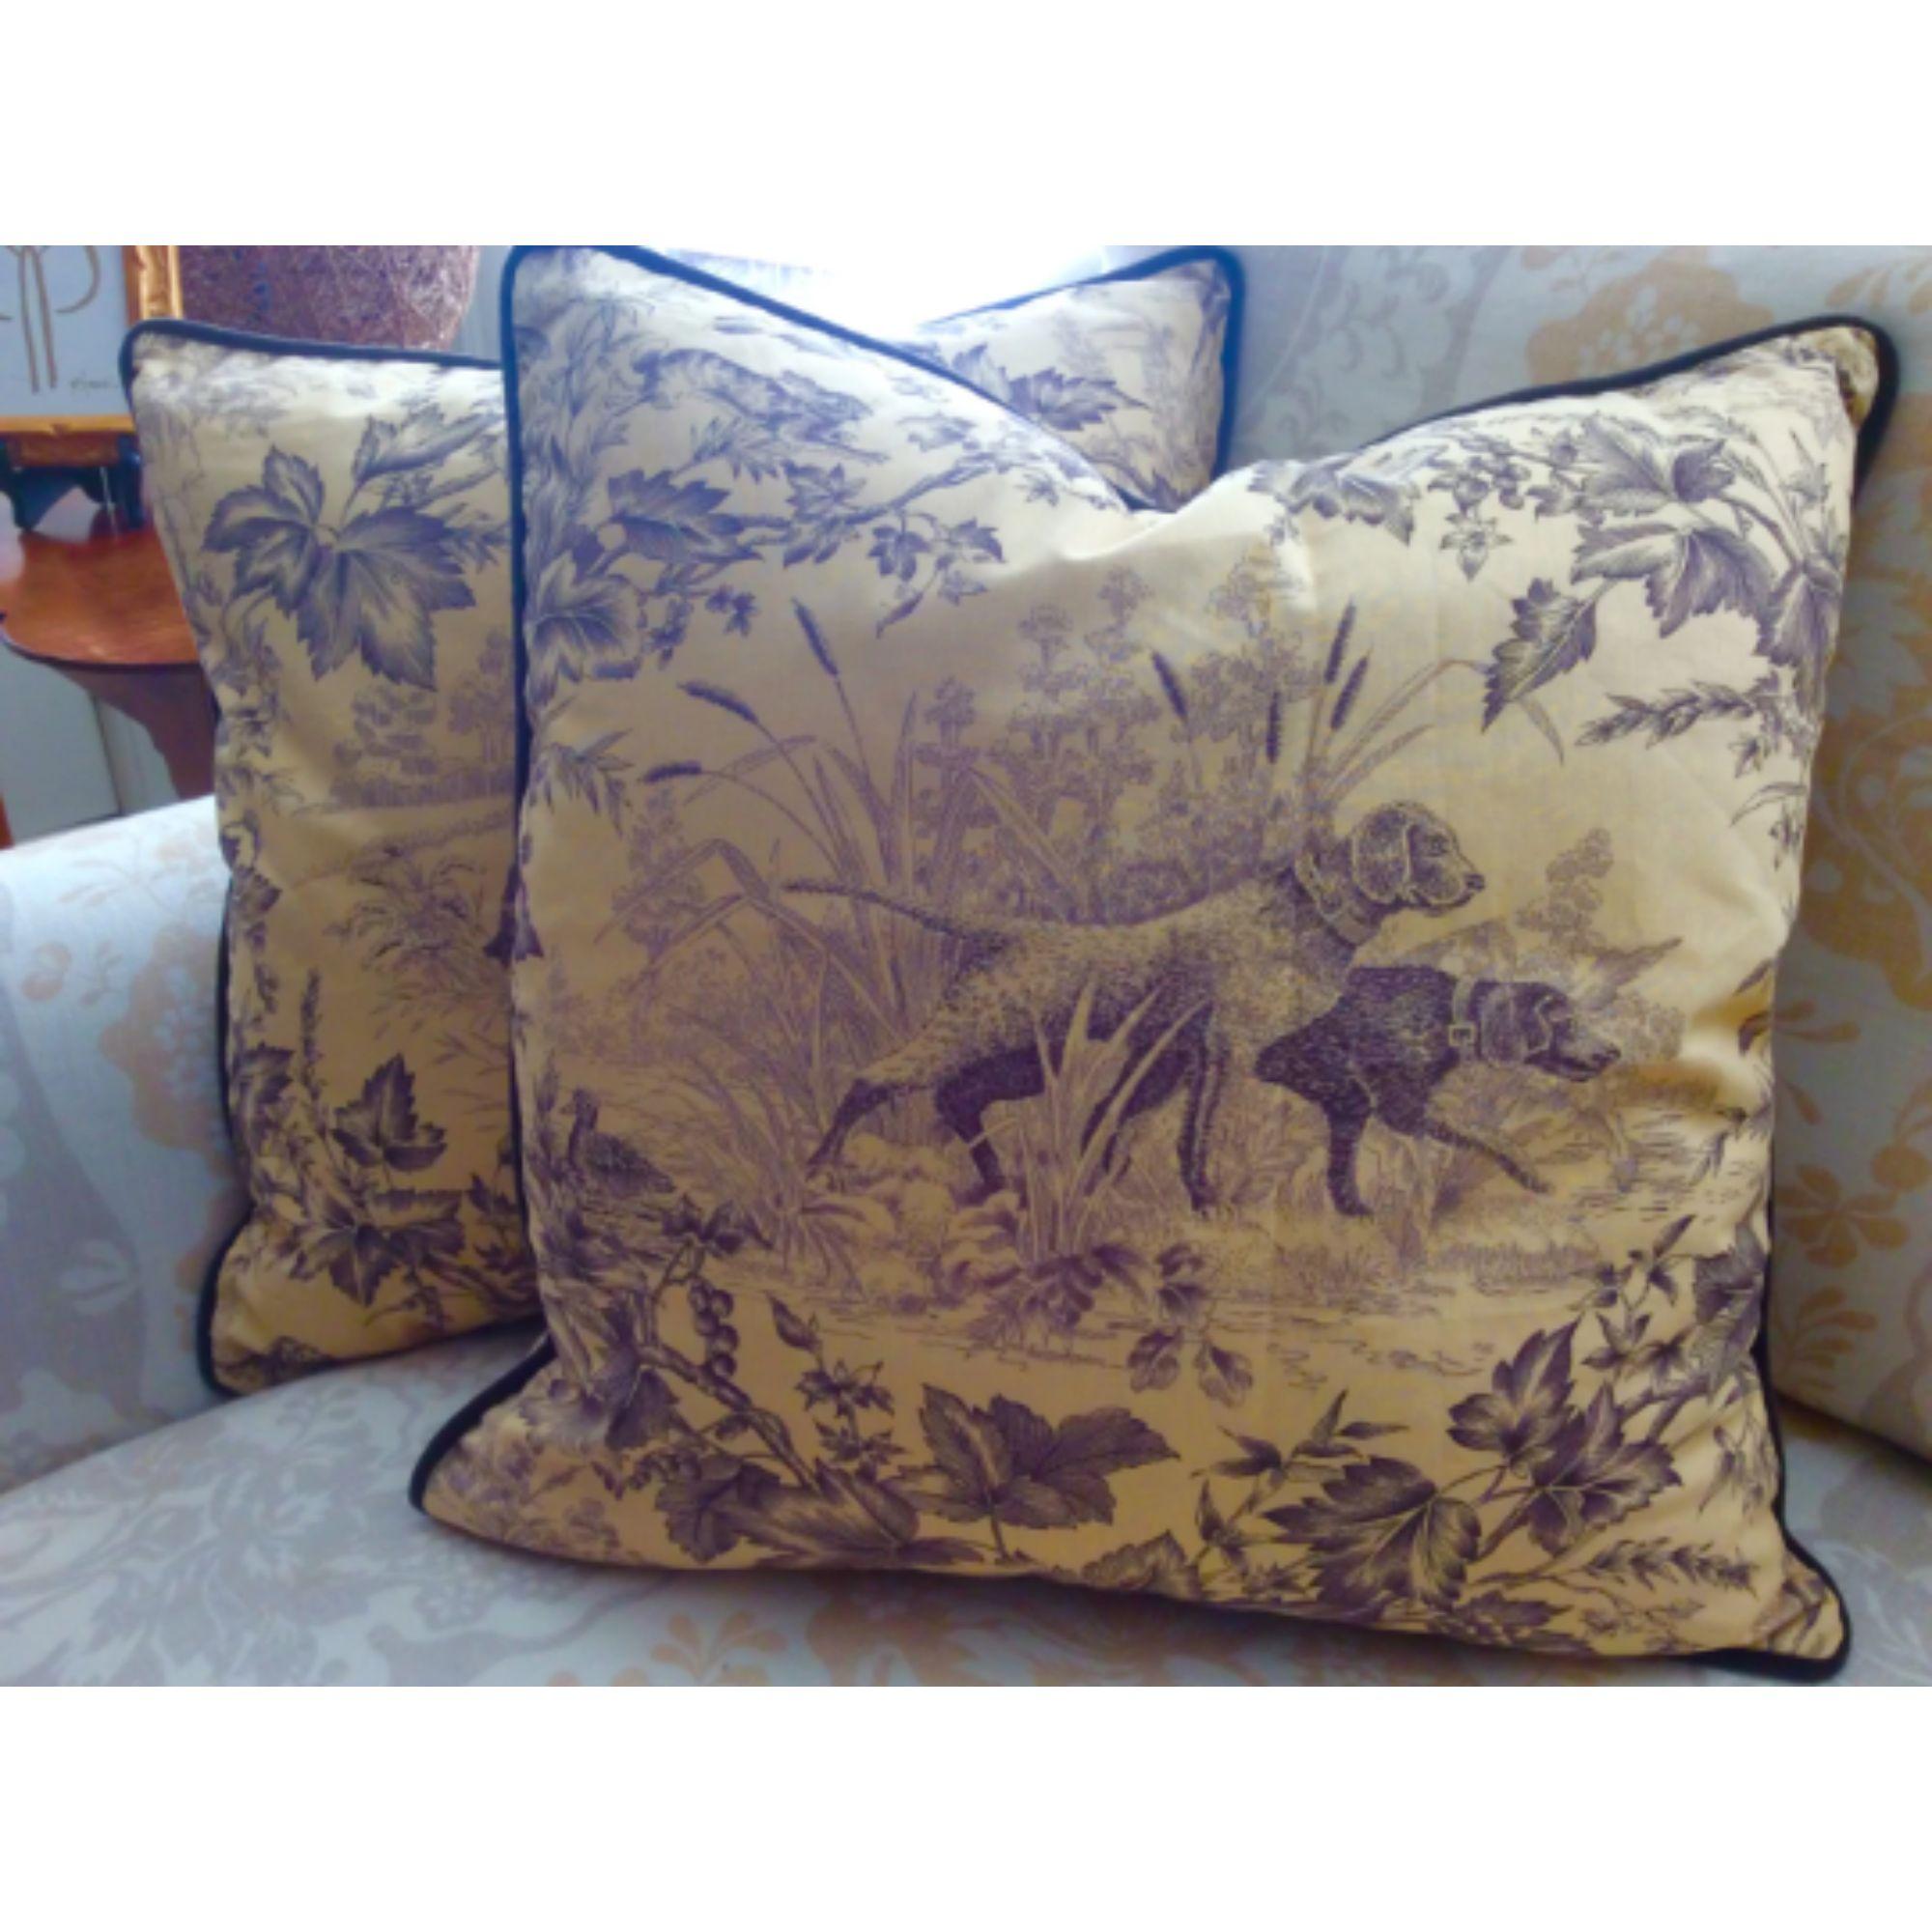 A classic! Hunting Toile from Brunschwig and Fils in tobacco and cream features a printed fabric depicting birds and hunting dogs. Colors are soft brown on cream and have been further enhanced with a brown cord and coordinating linen back.

One